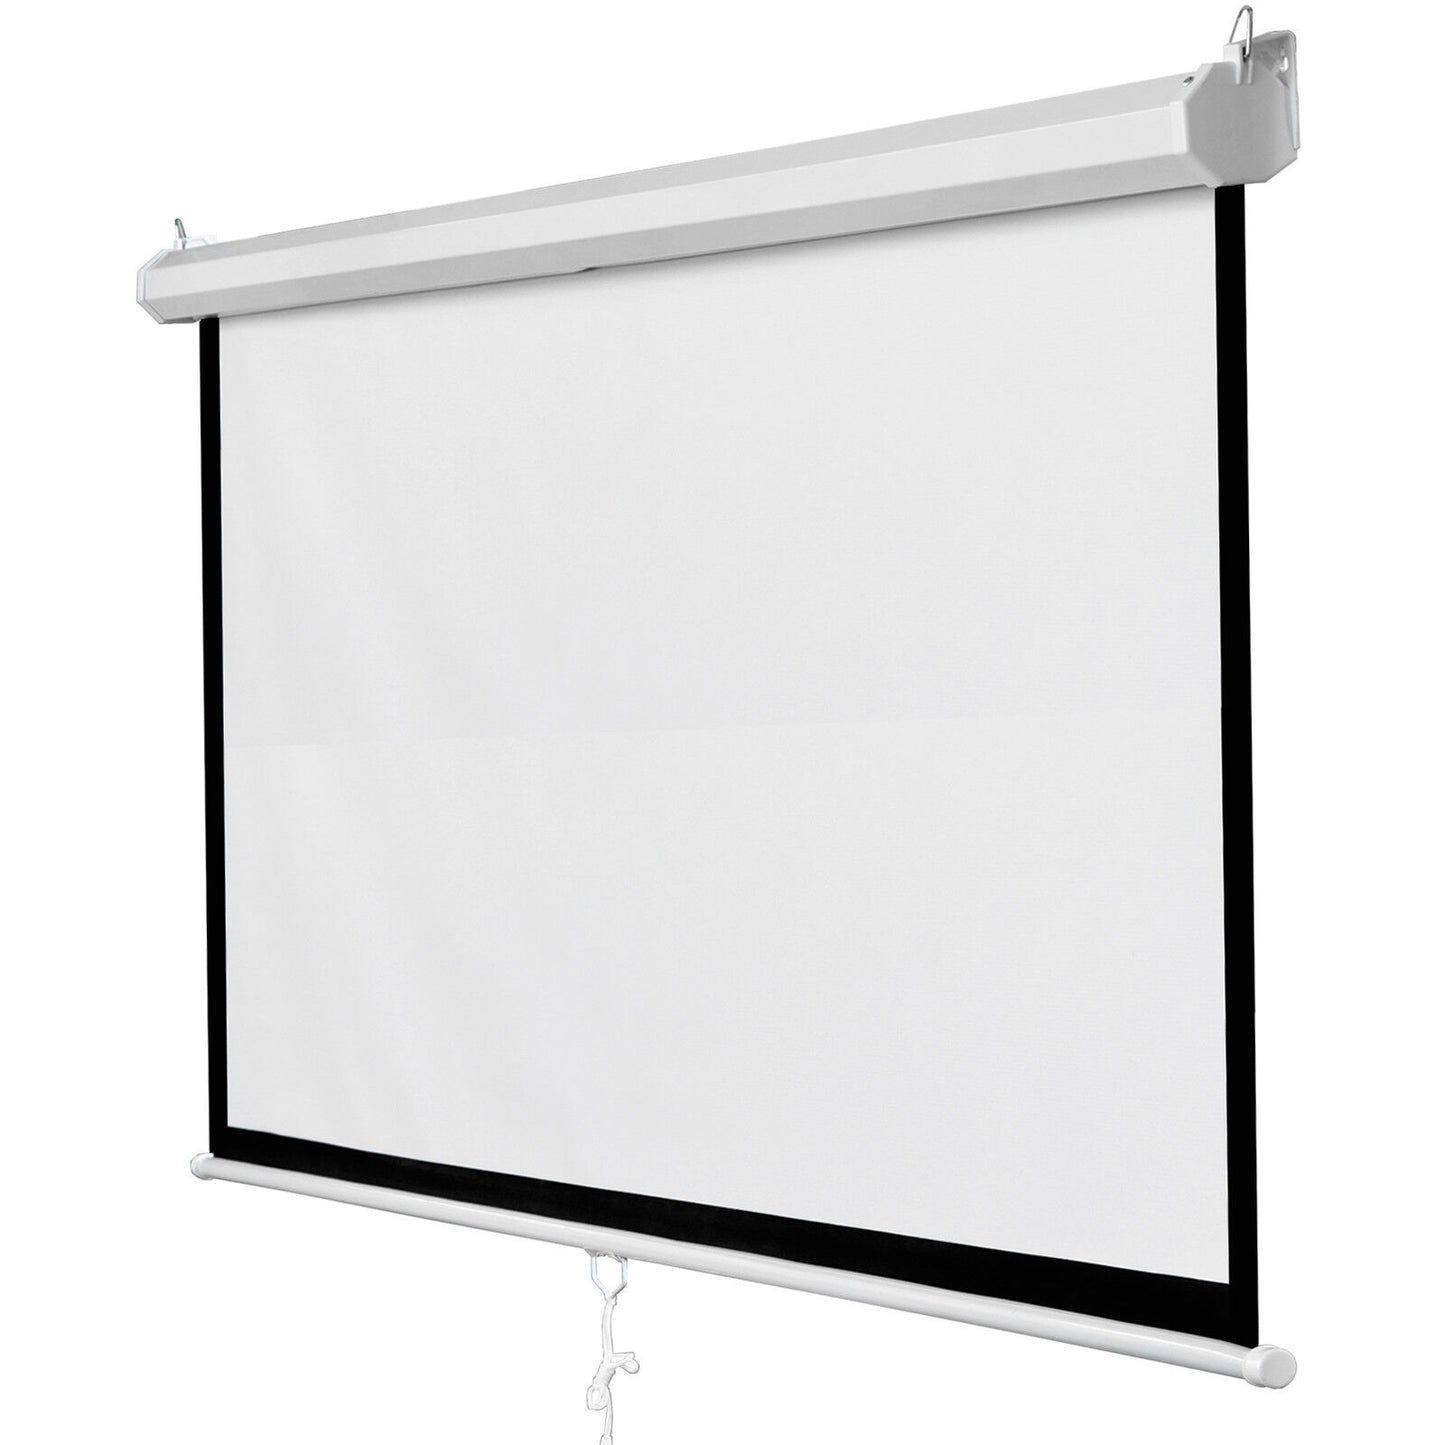 119" Manual Pull Down Projector Projection Screen Home Theater Movie 84"x84"